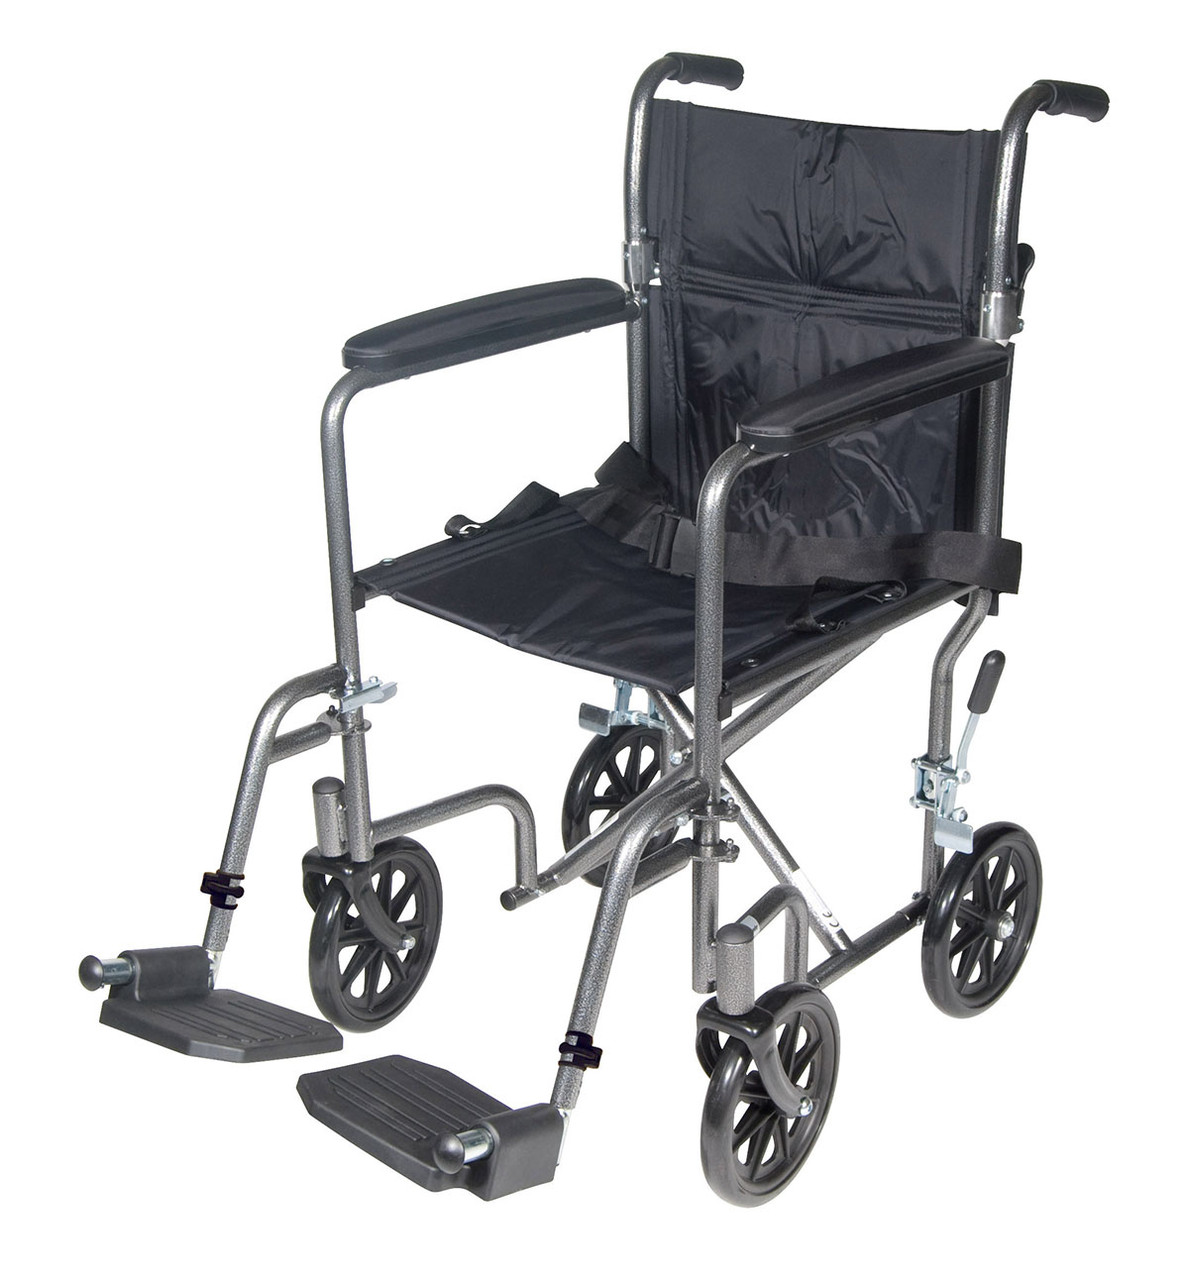 https://cdn11.bigcommerce.com/s-13ttxa/images/stencil/1280x1280/products/22117/25346/Drive_17_Seat_Lightweight_Steel_Transport_Wheelchair_Fixed_Full_Arms__88798.1683925853.jpg?c=2